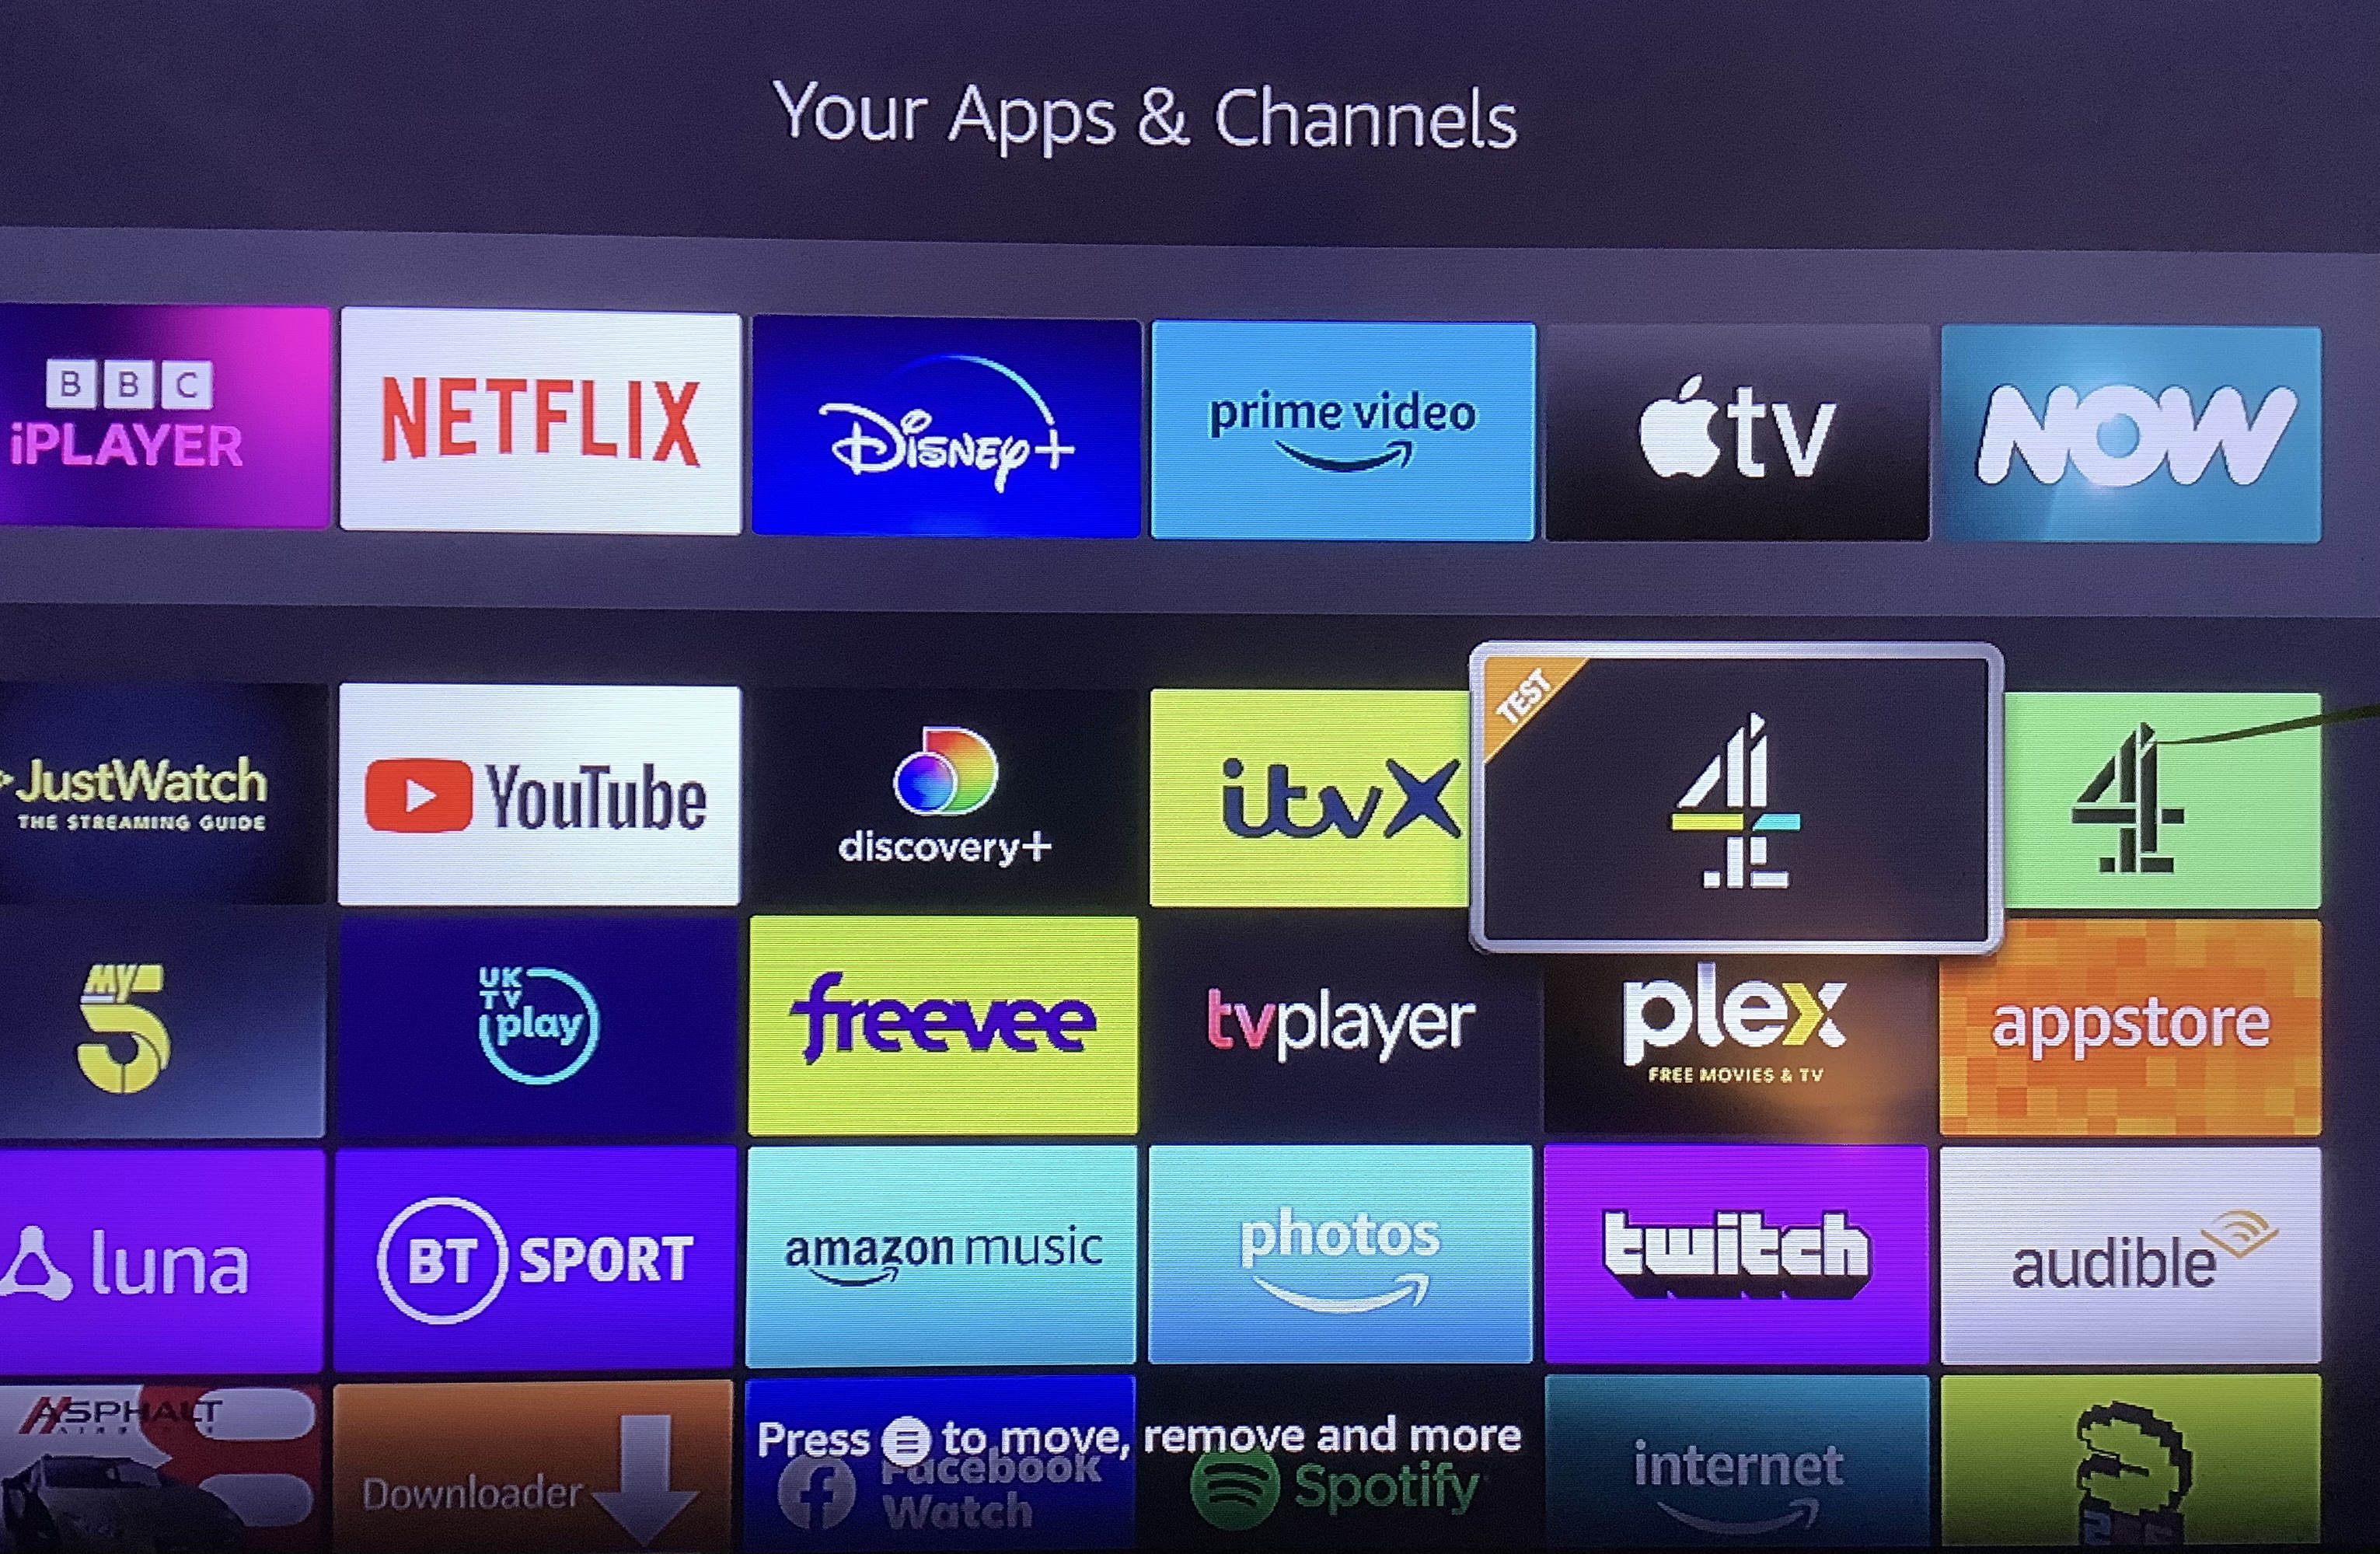 Channel 4 installs 2 apps